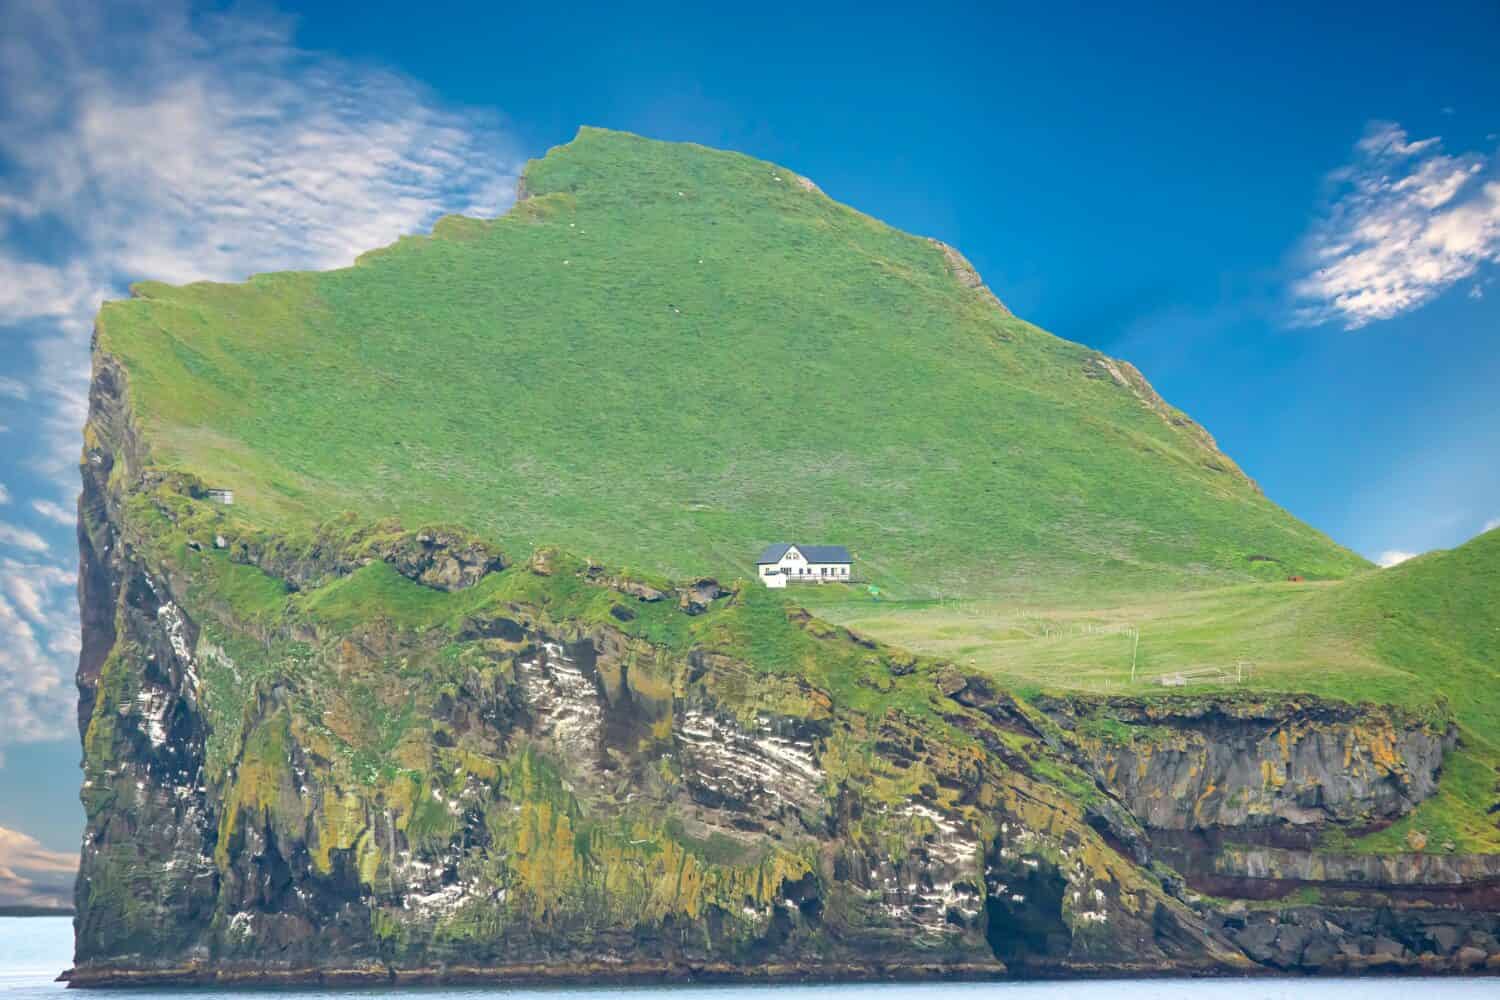 Discover The Lodge on the Elliðaey - The Loneliest House in the World ...